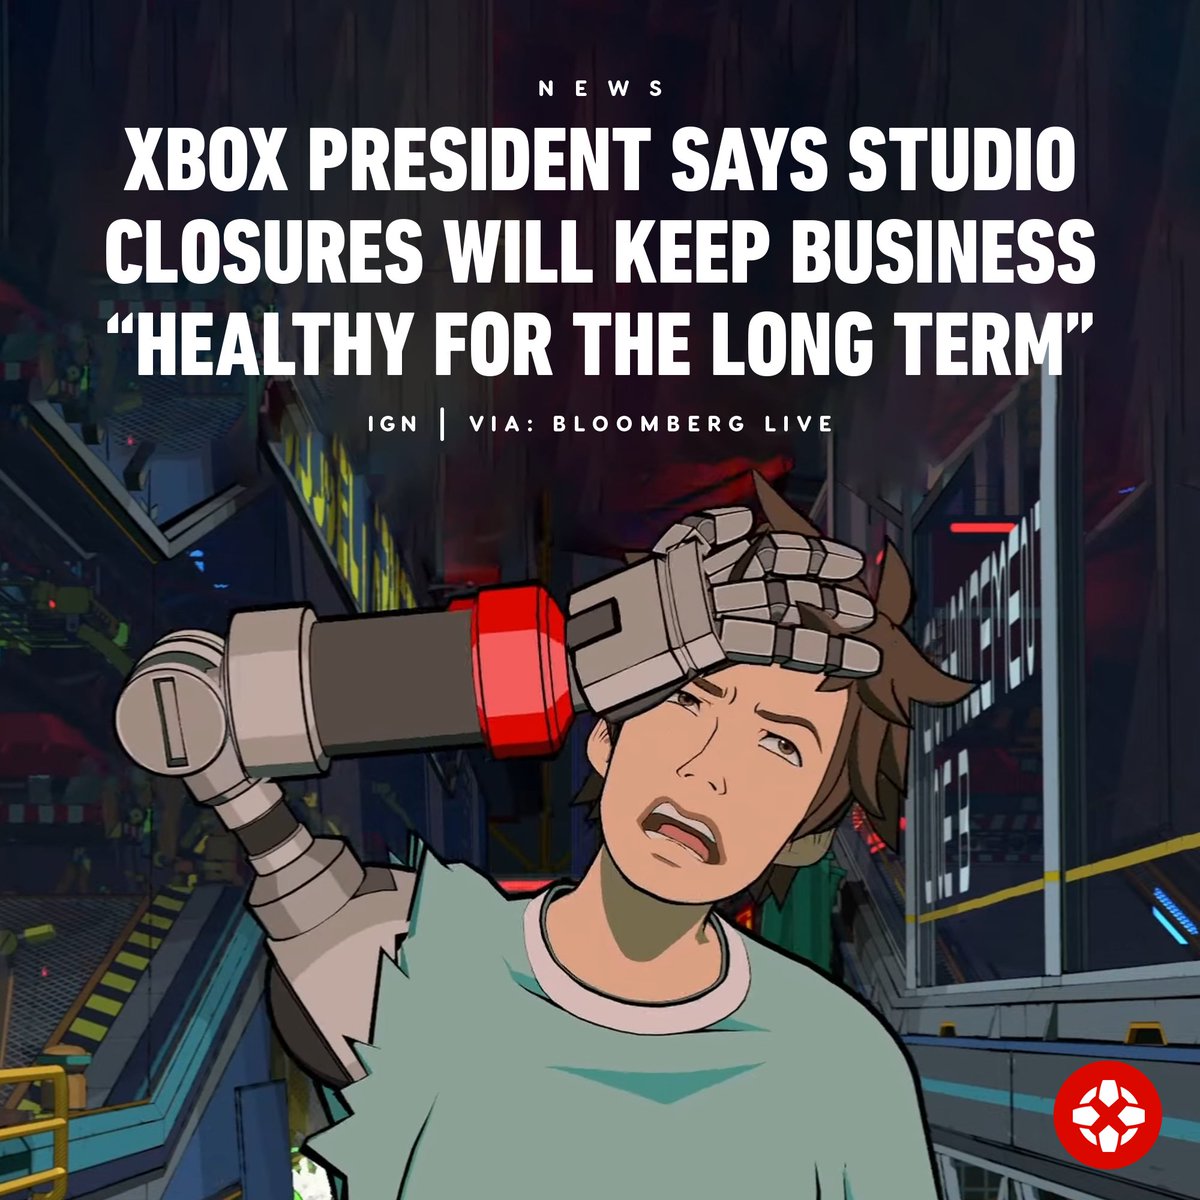 Xbox's Sarah Bond has responded to questions about Microsoft’s decision to shut a number of much-loved studios this week, insisting it was about ensuring the Xbox business remains healthy for the long-term during 'this moment of transition.' bit.ly/4bbJDc8